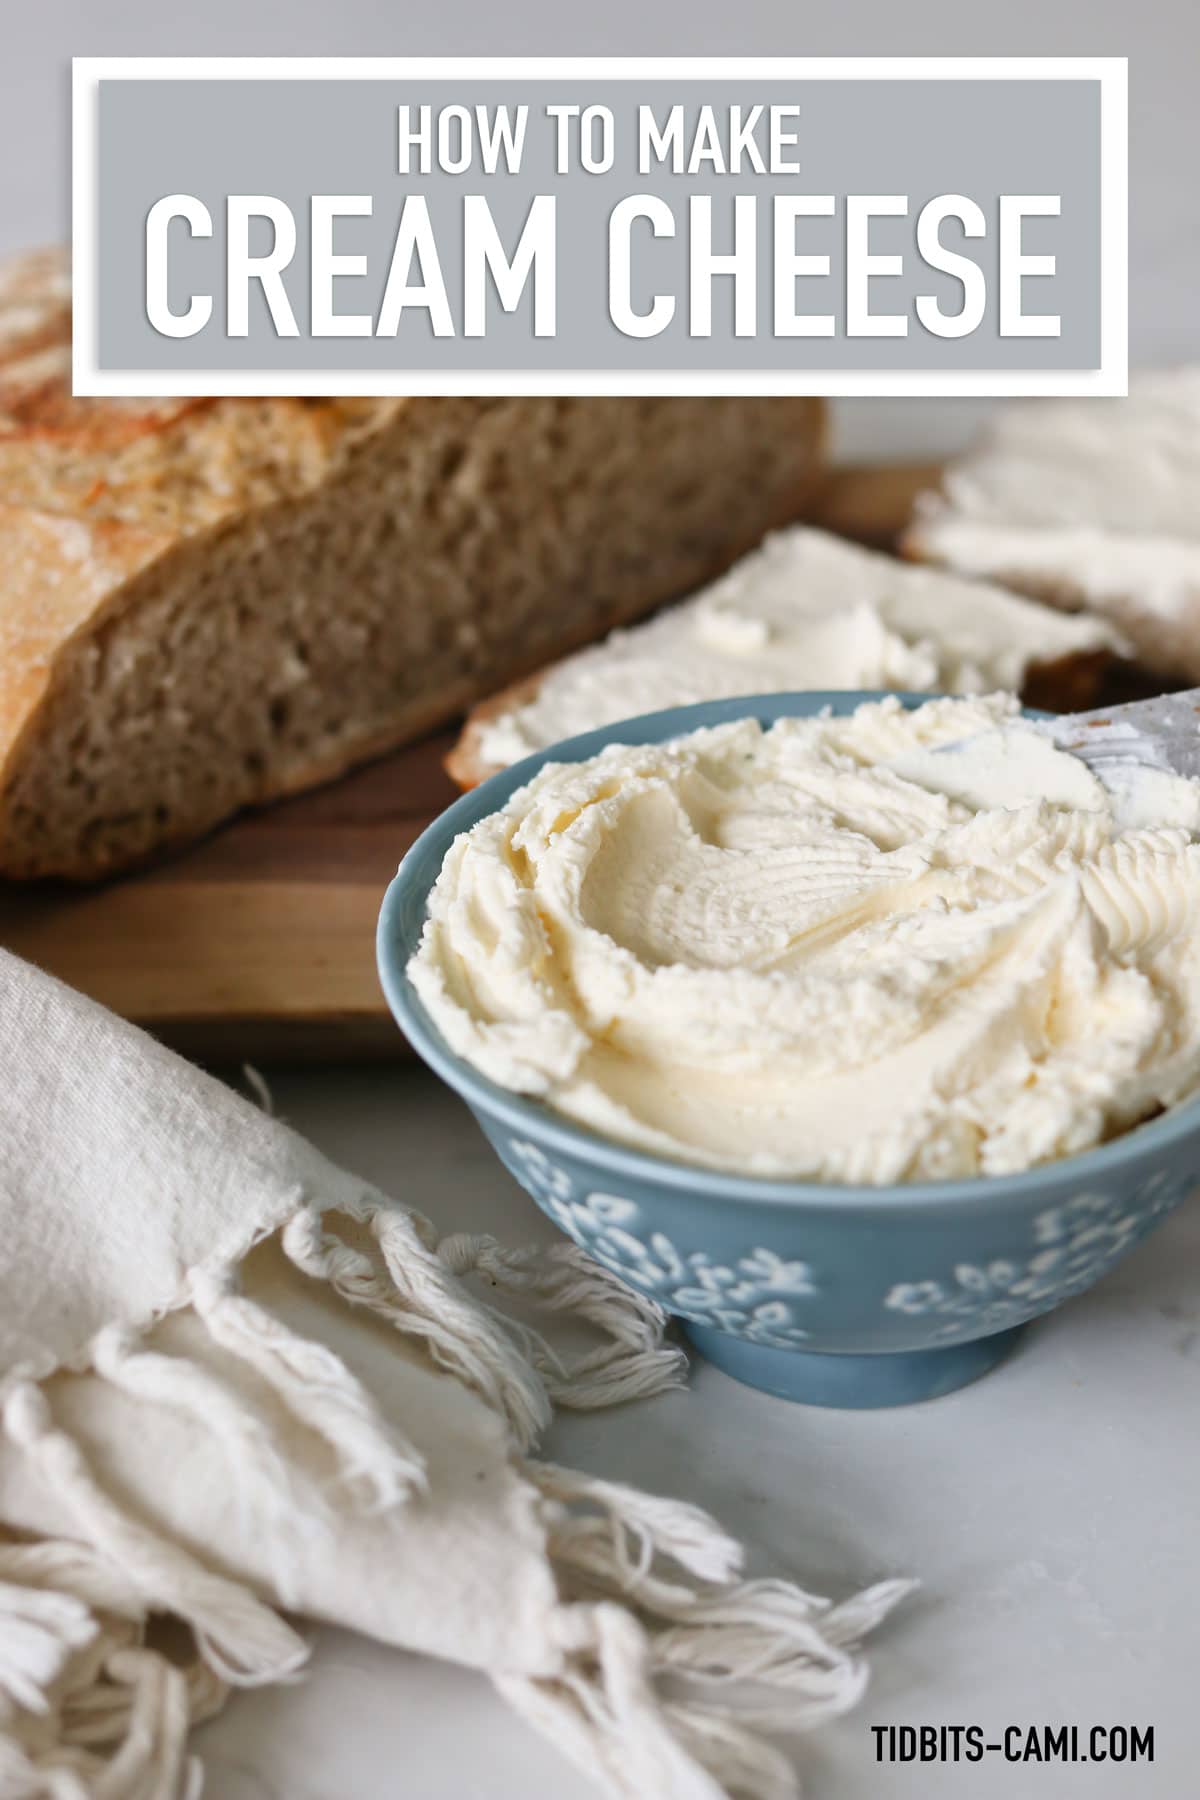 How to Make Cream Cheese with Raw Milk - Tidbits